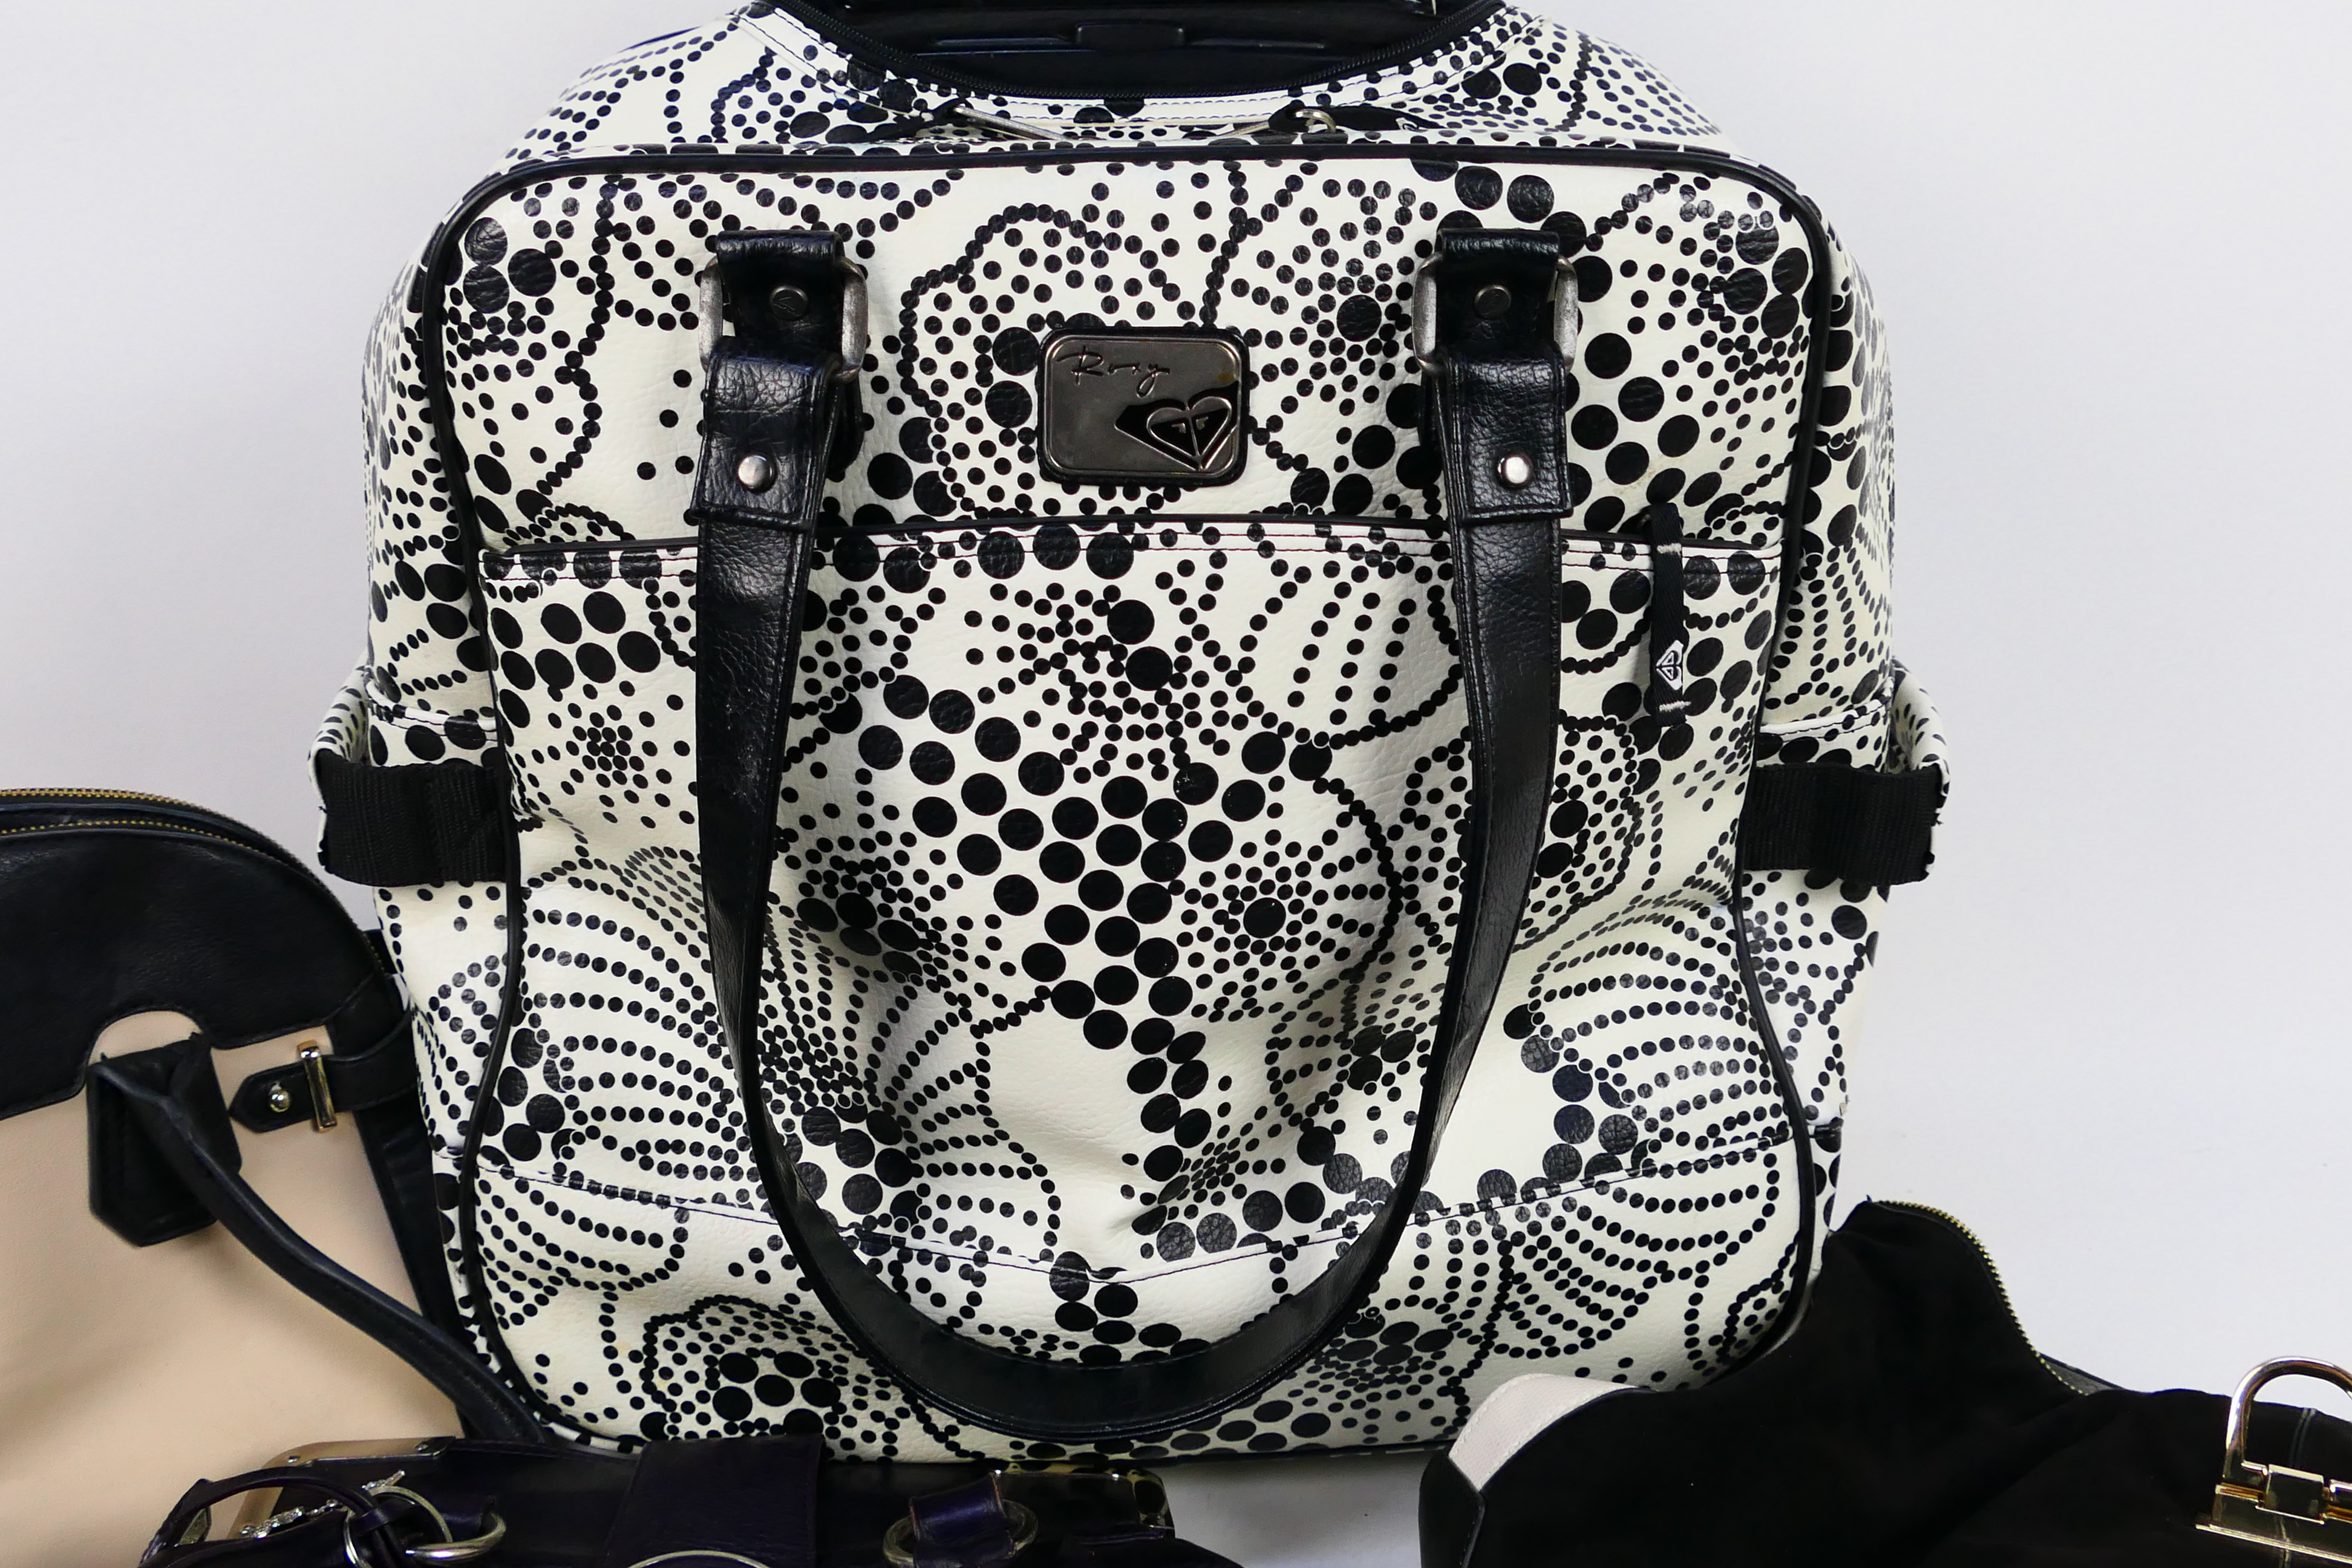 Jasper Conrad - Roxy - River Island. A selection of had bags in used condition. - Image 2 of 5